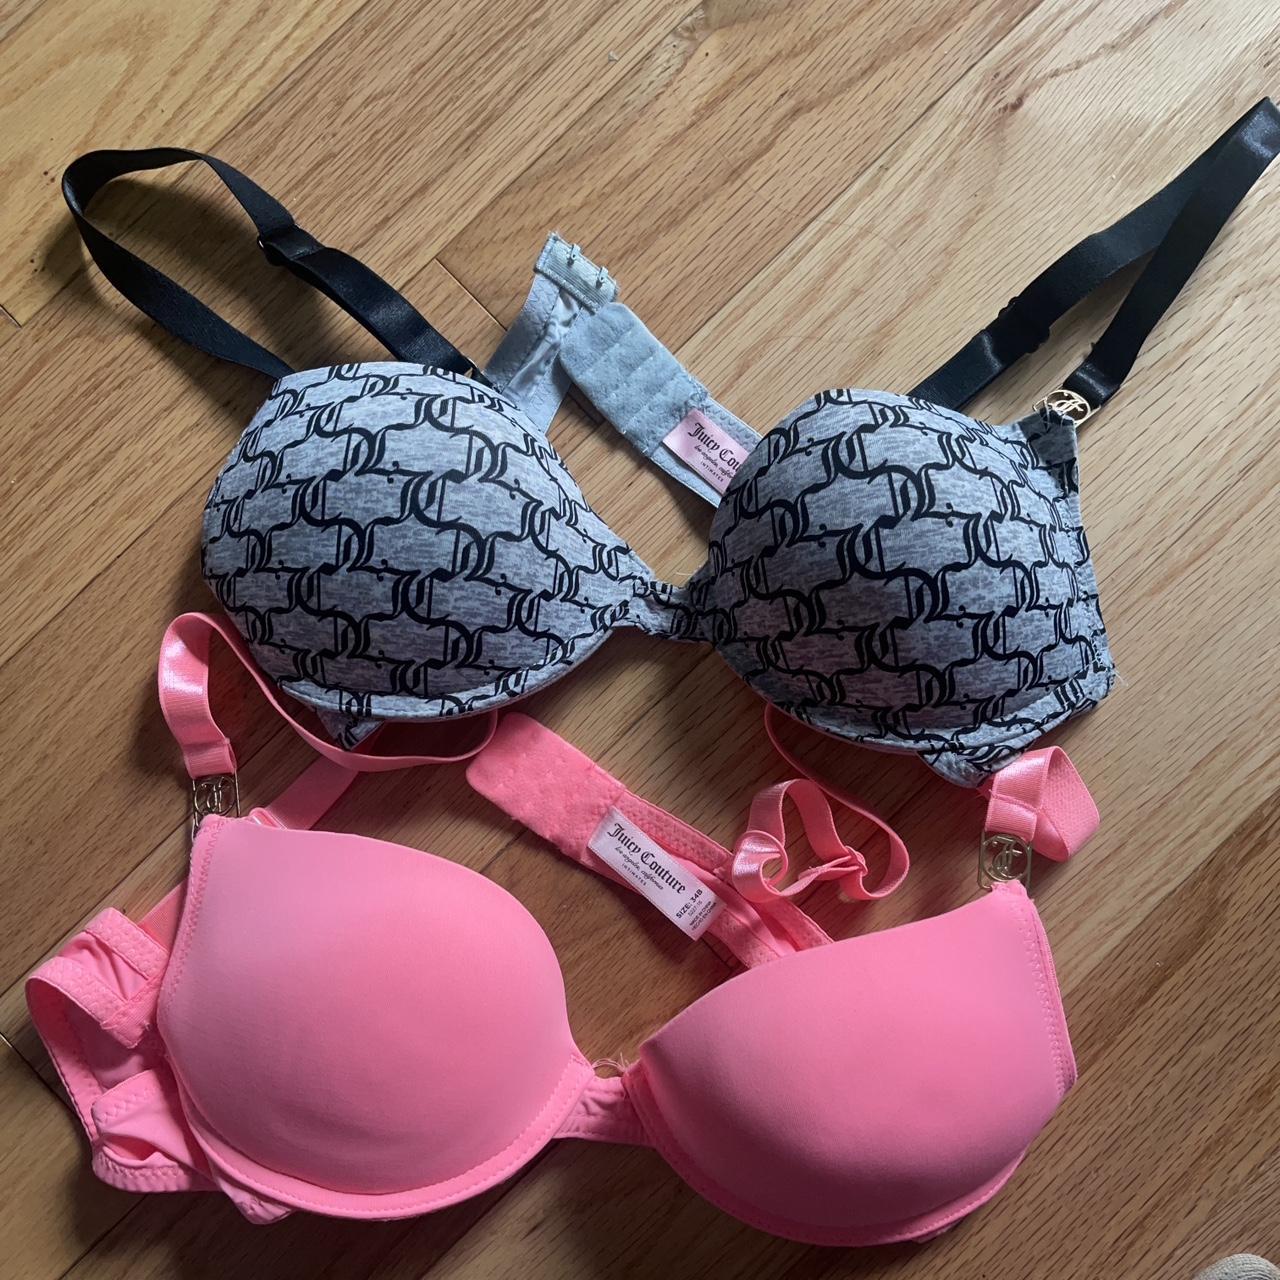 Two piece Juicy Couture bra bundle! Only worn to